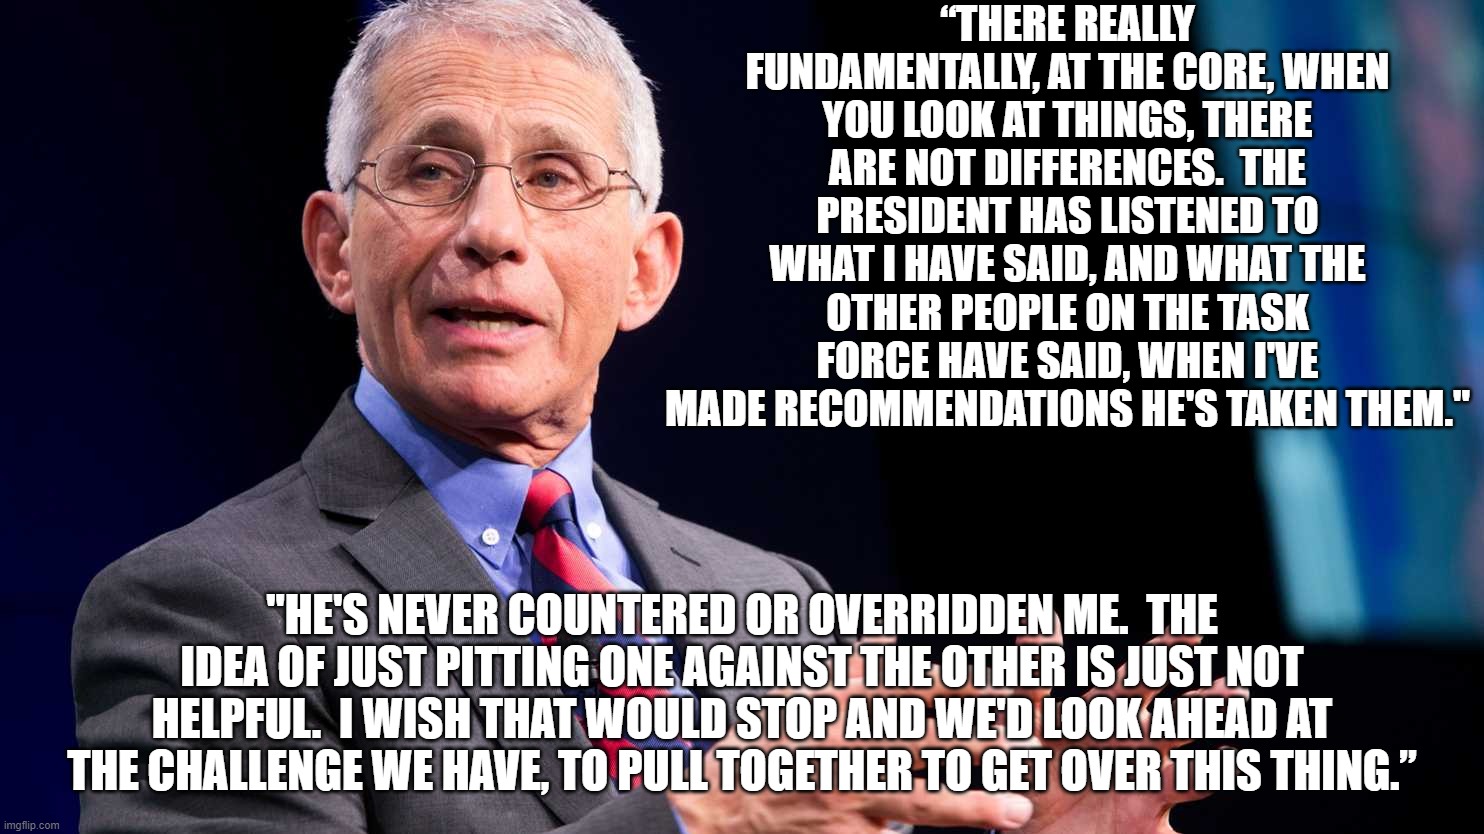 https://omny.fm/shows/mornings-on-the-mall/wmal-interview-dr-anthony-fauci-m-d-03-24-20 | “THERE REALLY FUNDAMENTALLY, AT THE CORE, WHEN YOU LOOK AT THINGS, THERE ARE NOT DIFFERENCES.  THE PRESIDENT HAS LISTENED TO WHAT I HAVE SAID, AND WHAT THE OTHER PEOPLE ON THE TASK FORCE HAVE SAID, WHEN I'VE MADE RECOMMENDATIONS HE'S TAKEN THEM."; "HE'S NEVER COUNTERED OR OVERRIDDEN ME.  THE IDEA OF JUST PITTING ONE AGAINST THE OTHER IS JUST NOT HELPFUL.  I WISH THAT WOULD STOP AND WE'D LOOK AHEAD AT THE CHALLENGE WE HAVE, TO PULL TOGETHER TO GET OVER THIS THING.” | image tagged in anthony fauci,coronavirus,covid-19,snowflakes,trump landslide 2020 | made w/ Imgflip meme maker